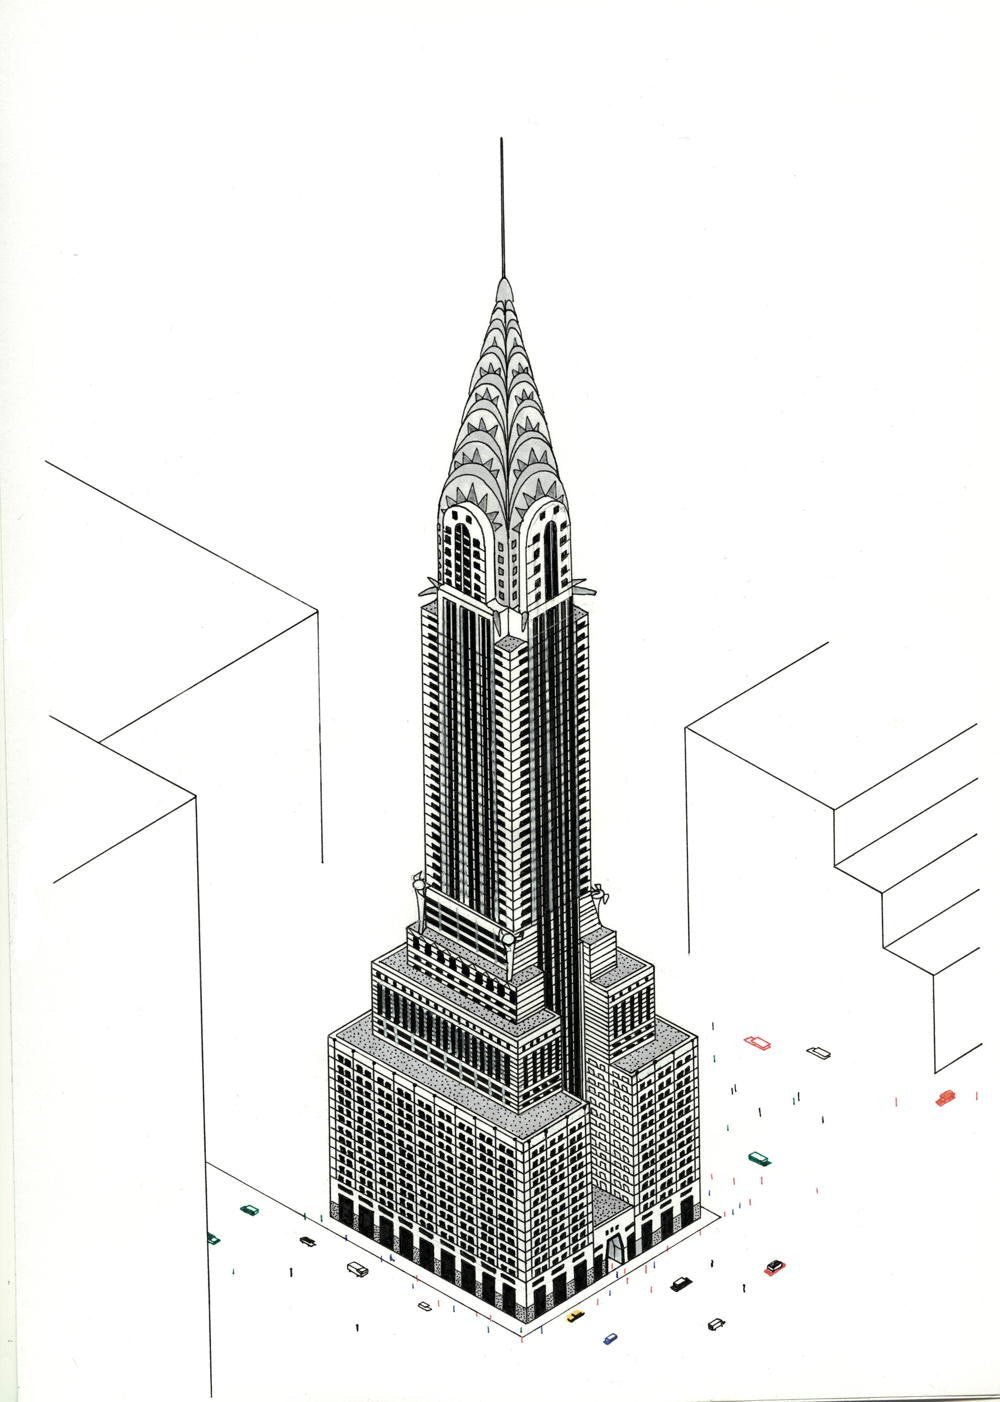 Who Built That? Skyscrapers: An Introduction to Skyscrapers and Their Architects